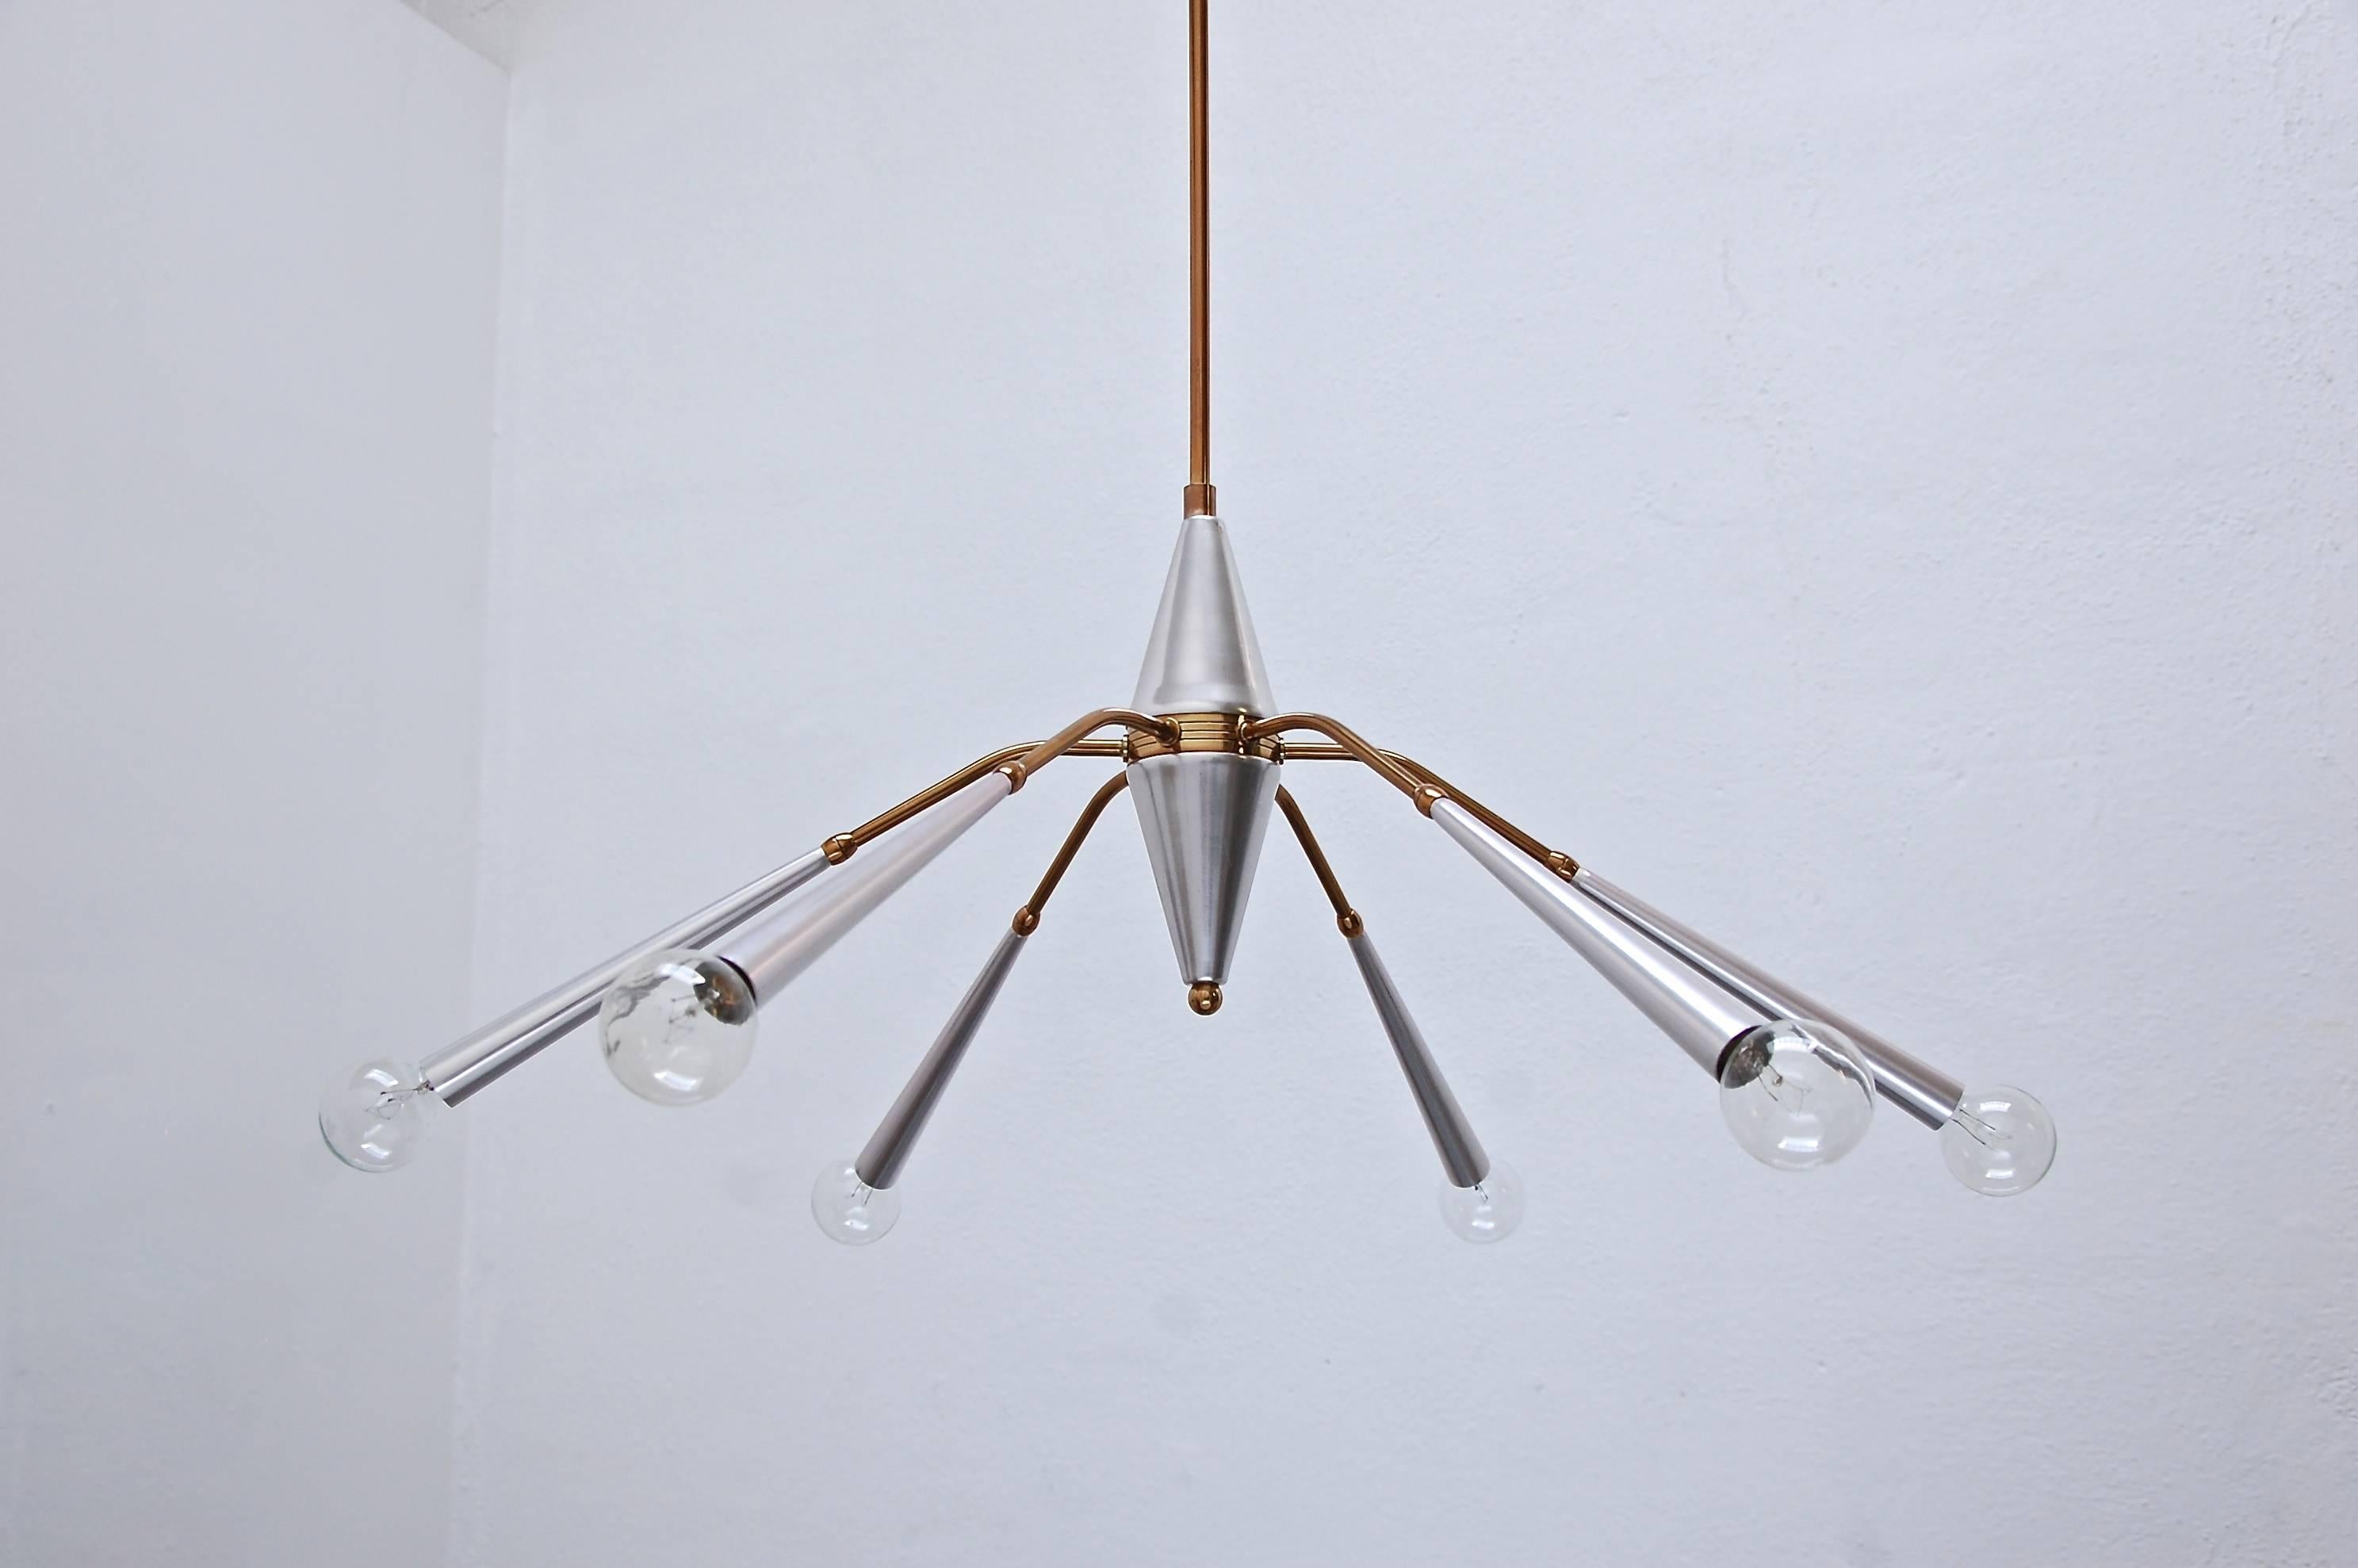 Late 1940s or very early 1950s Sputnik chandelier from Italy. Fine lines and graceful appearance. Brass and aluminum.

Measures: 28